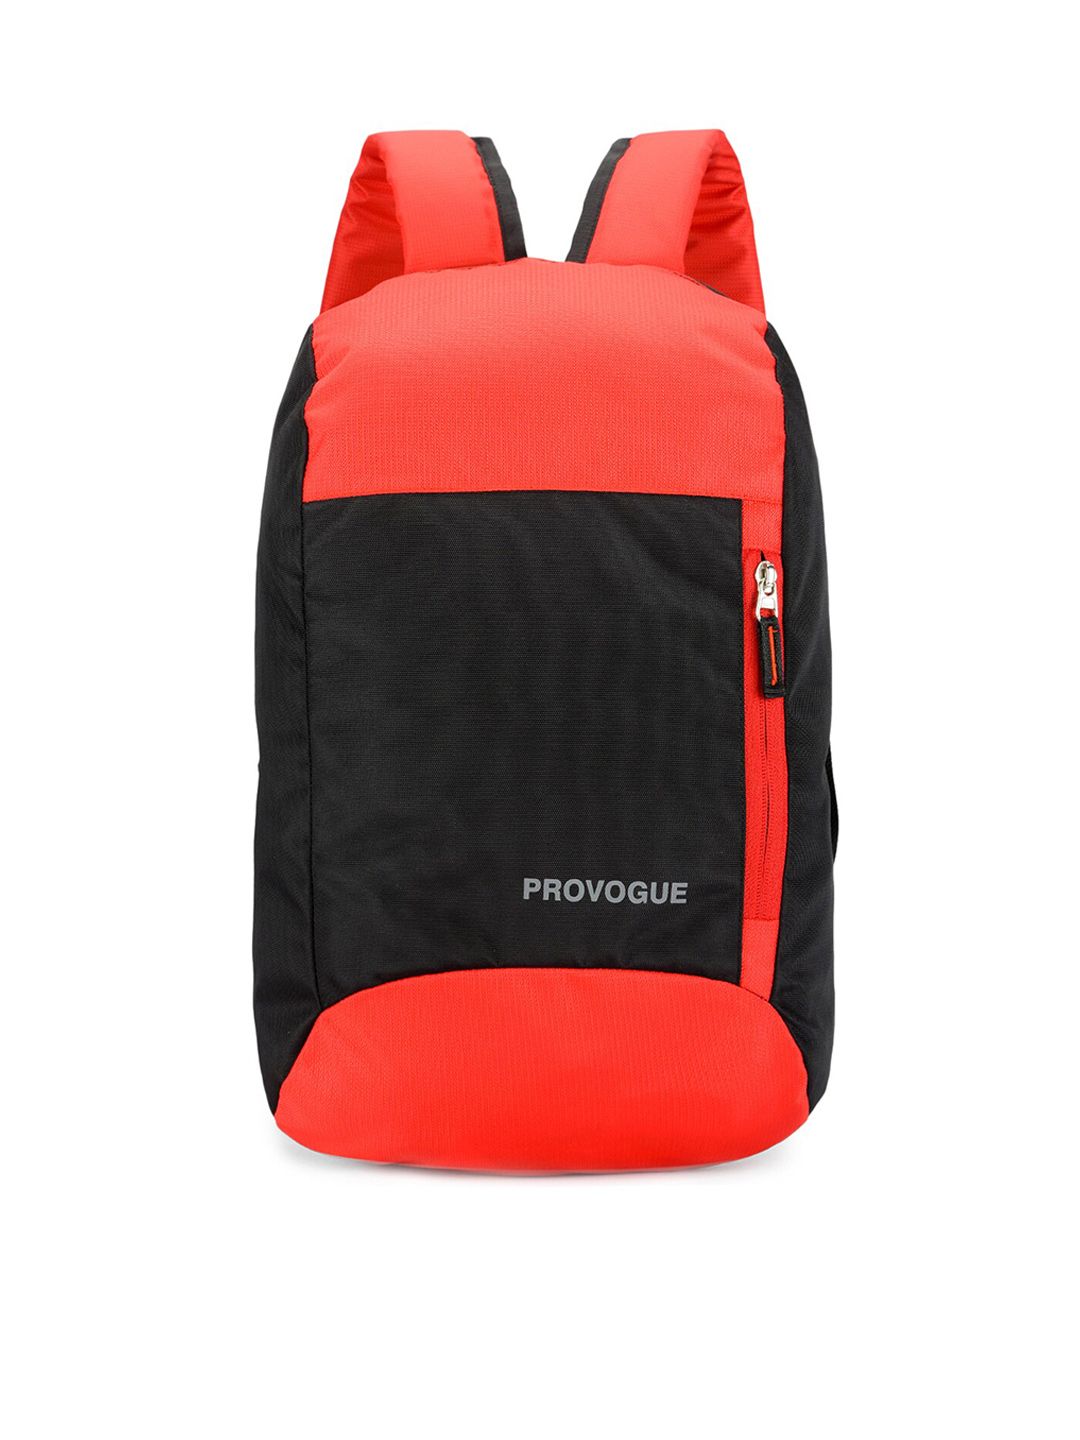 Provogue Unisex Red Colourblocked Backpack Price in India